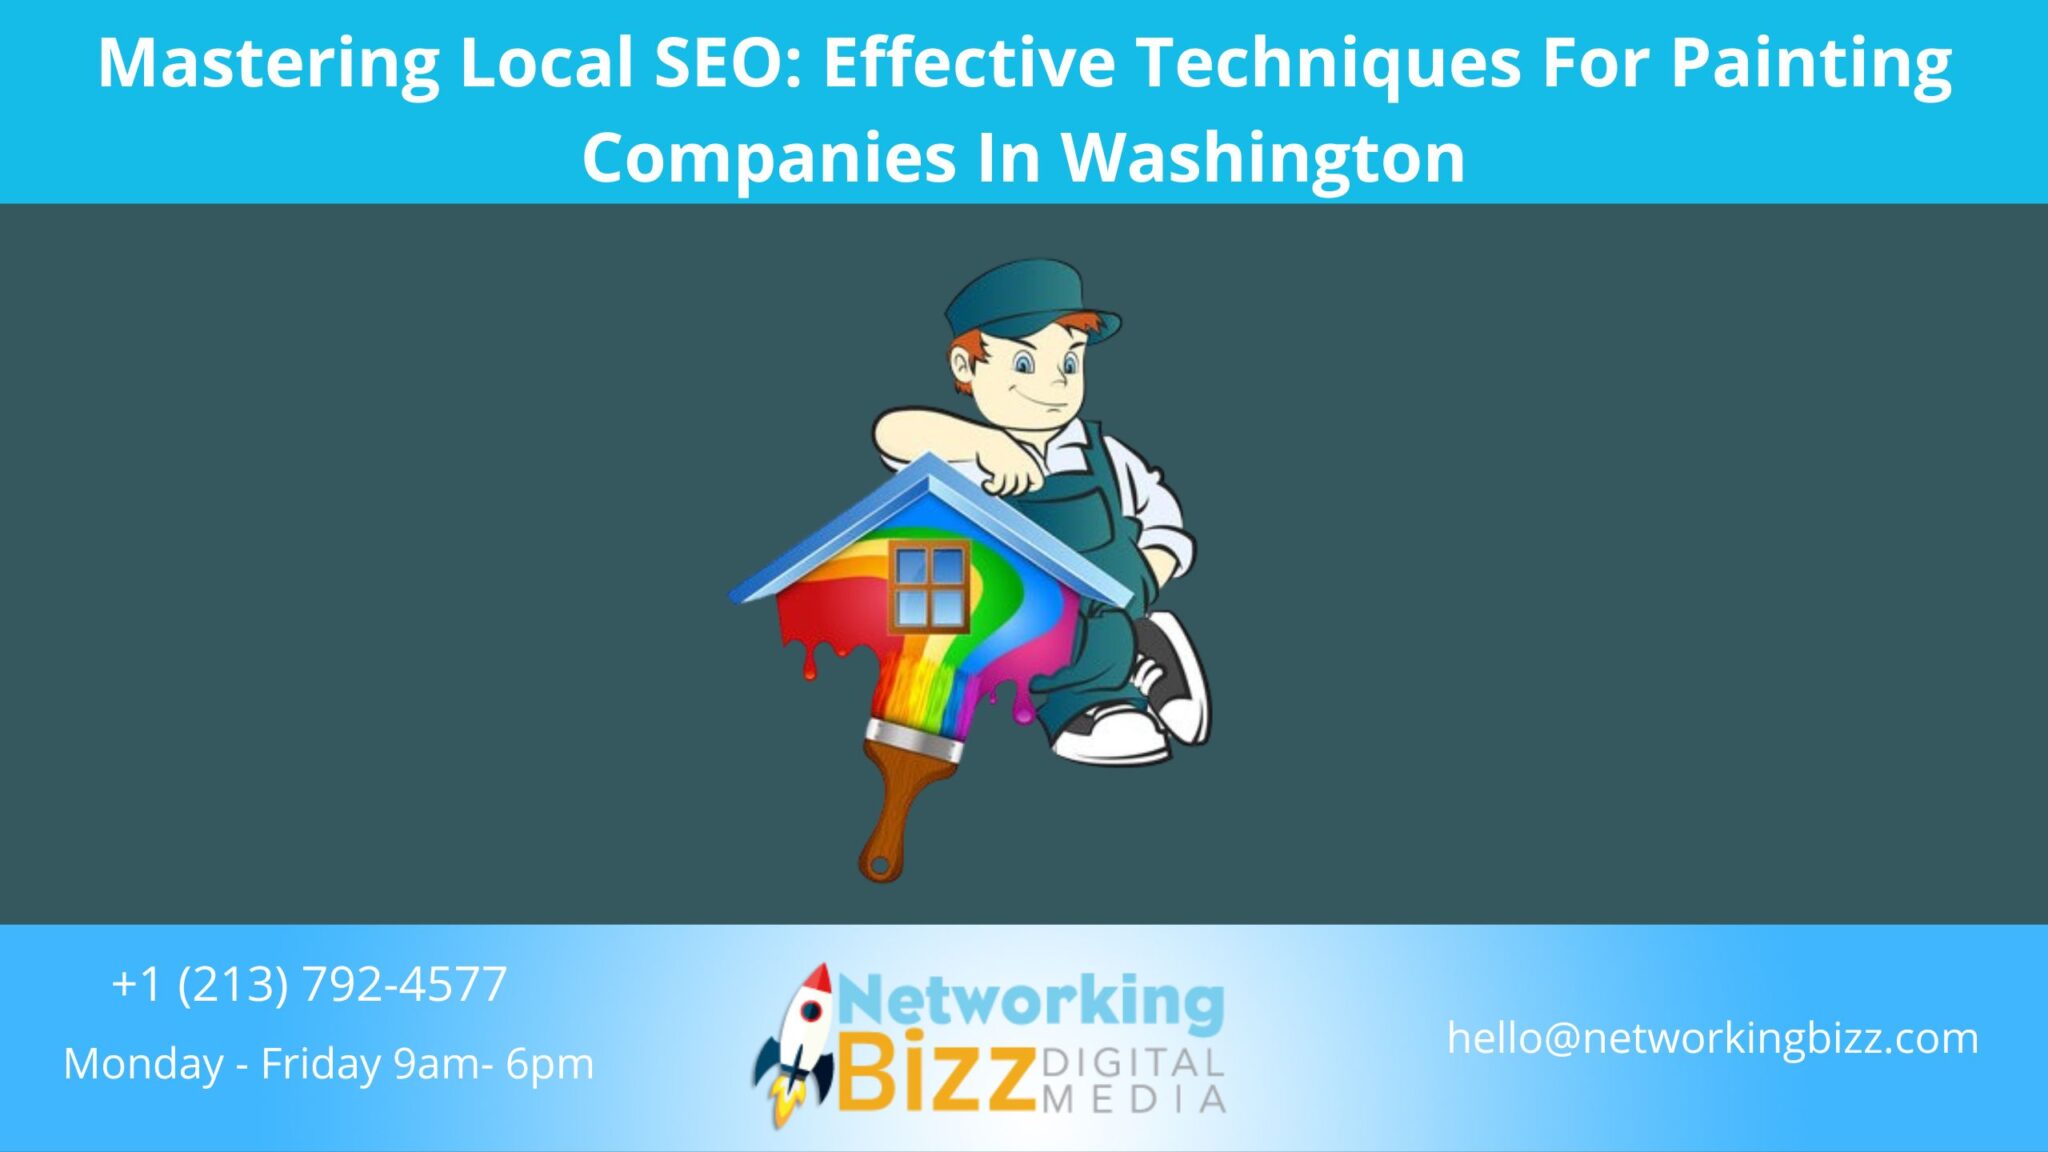 Mastering Local SEO: Effective Techniques For Painting Companies In Washington